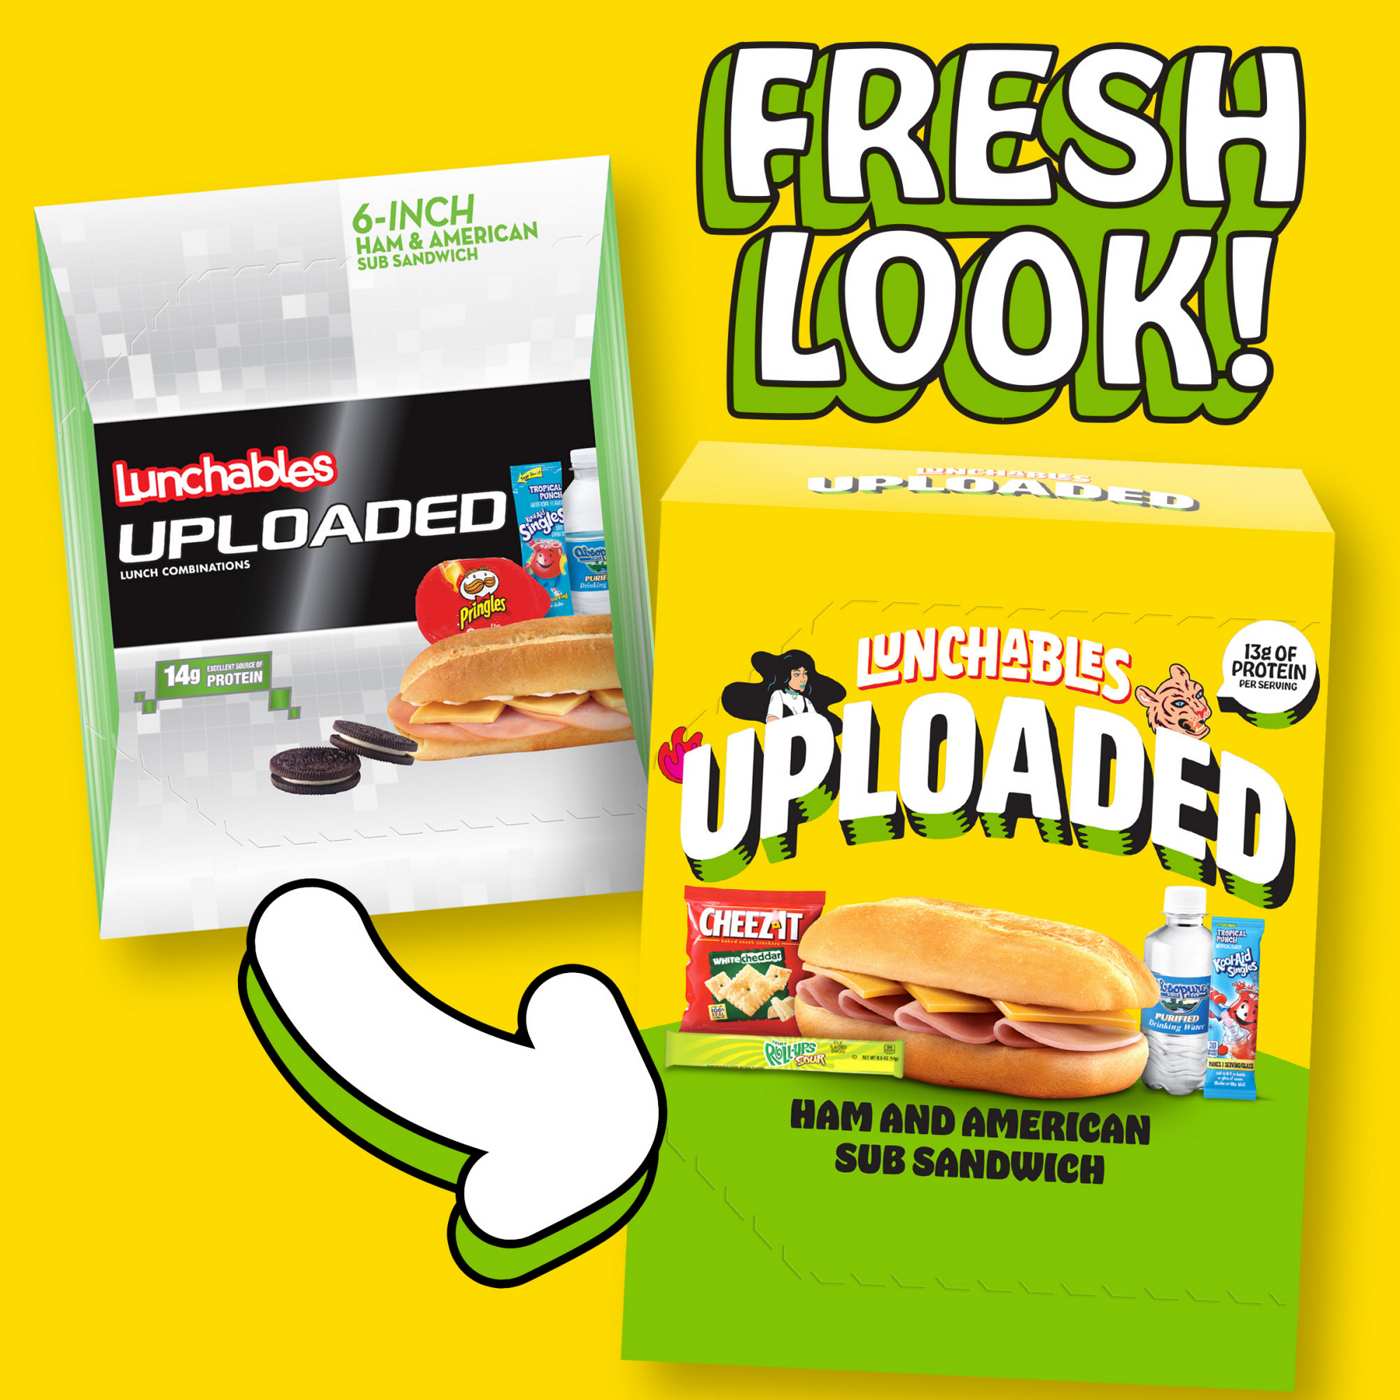 Lunchables Uploaded Meal Kit - Ham & American Sub Sandwich; image 2 of 4